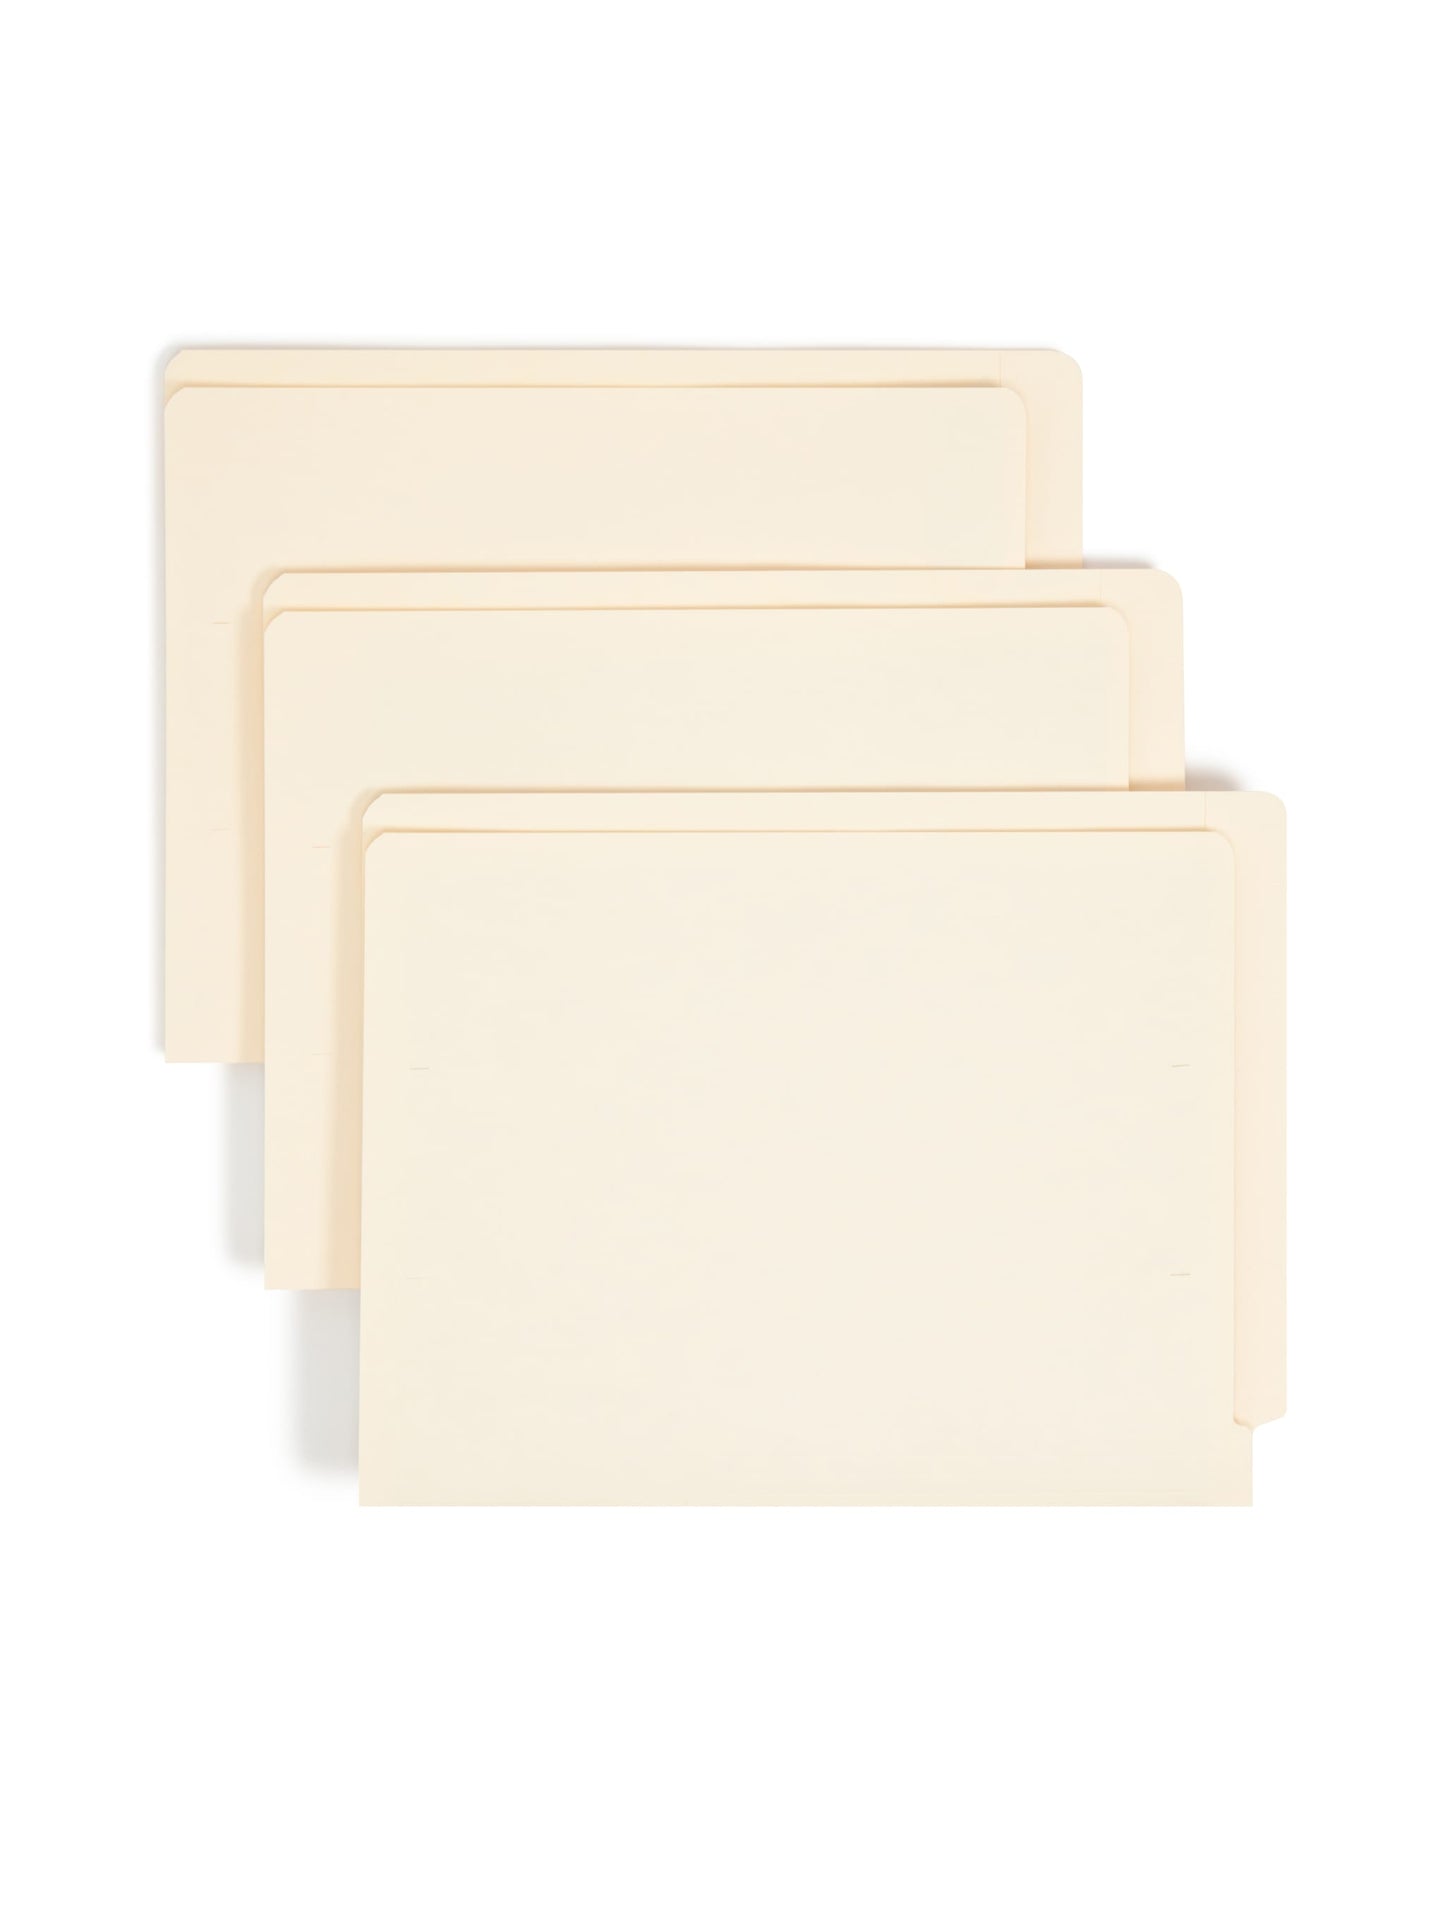 Shelf-Master® Reinforced End Tab File Folders, Straight-Cut Tab, 9 inch Front, Manila Color, Letter Size, Set of 100, 086486241090